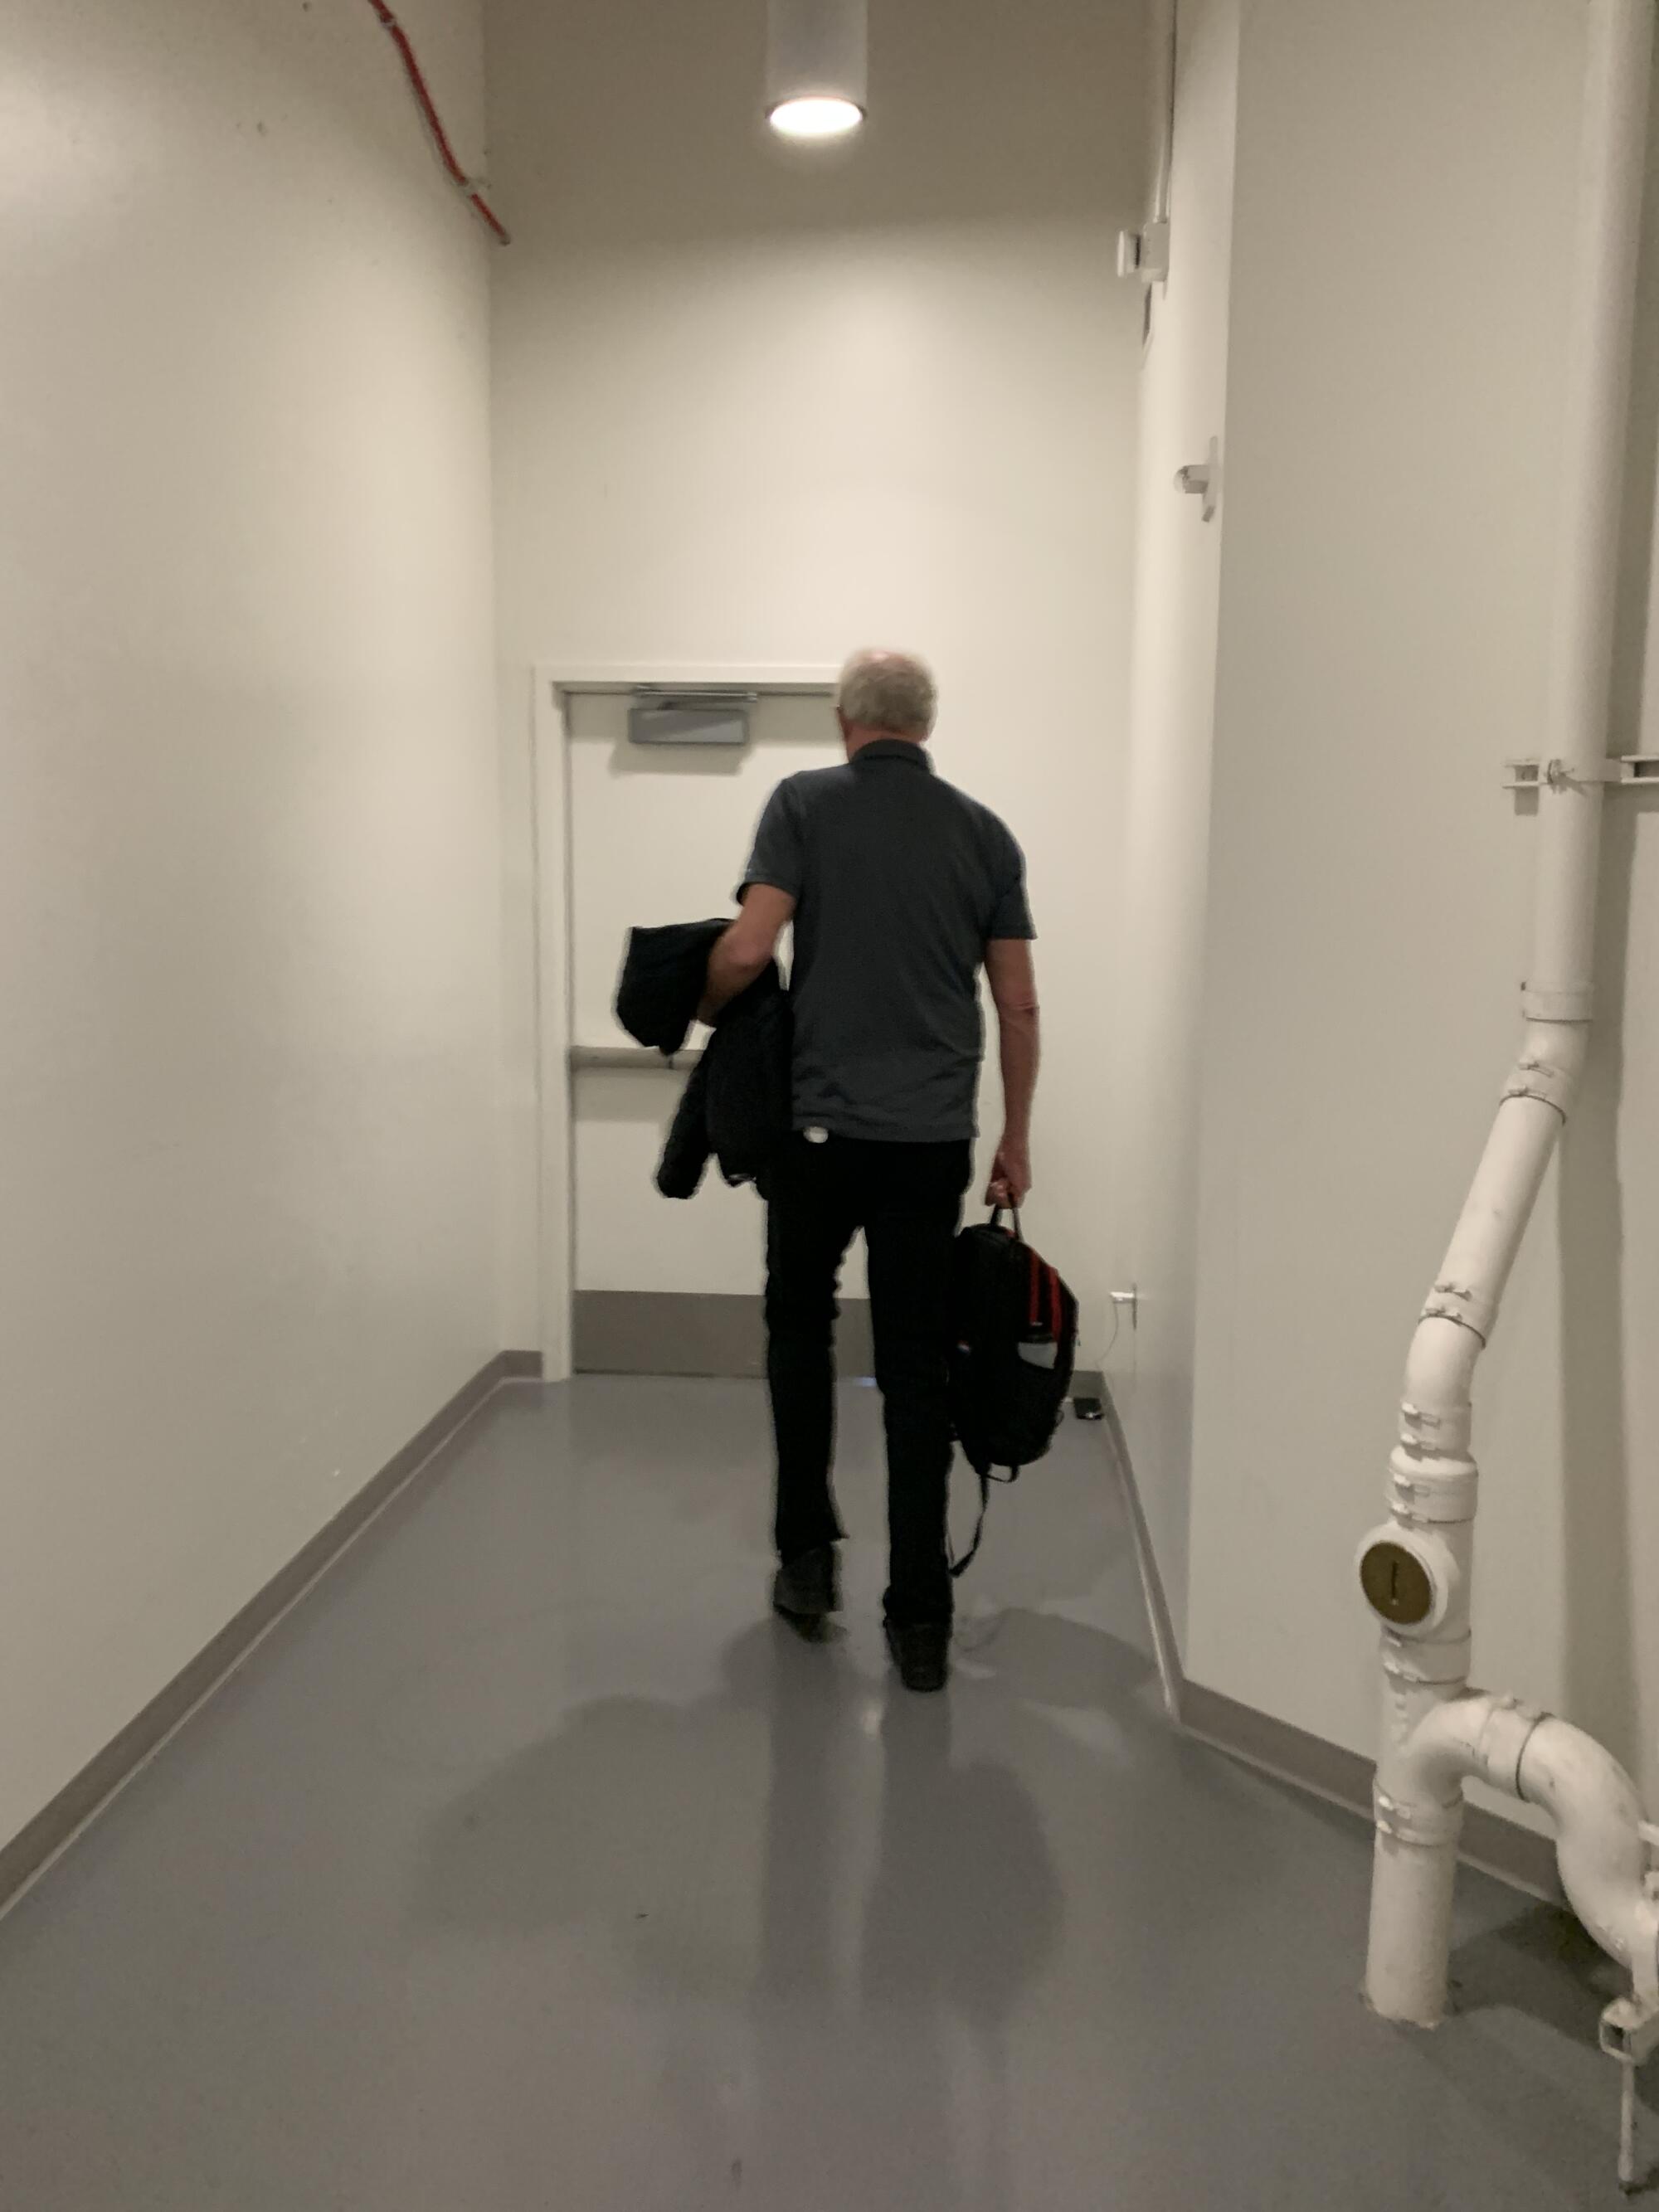 Bill Walton heads for a door at Pauley Pavilion on the UCLA campus in March 2022.